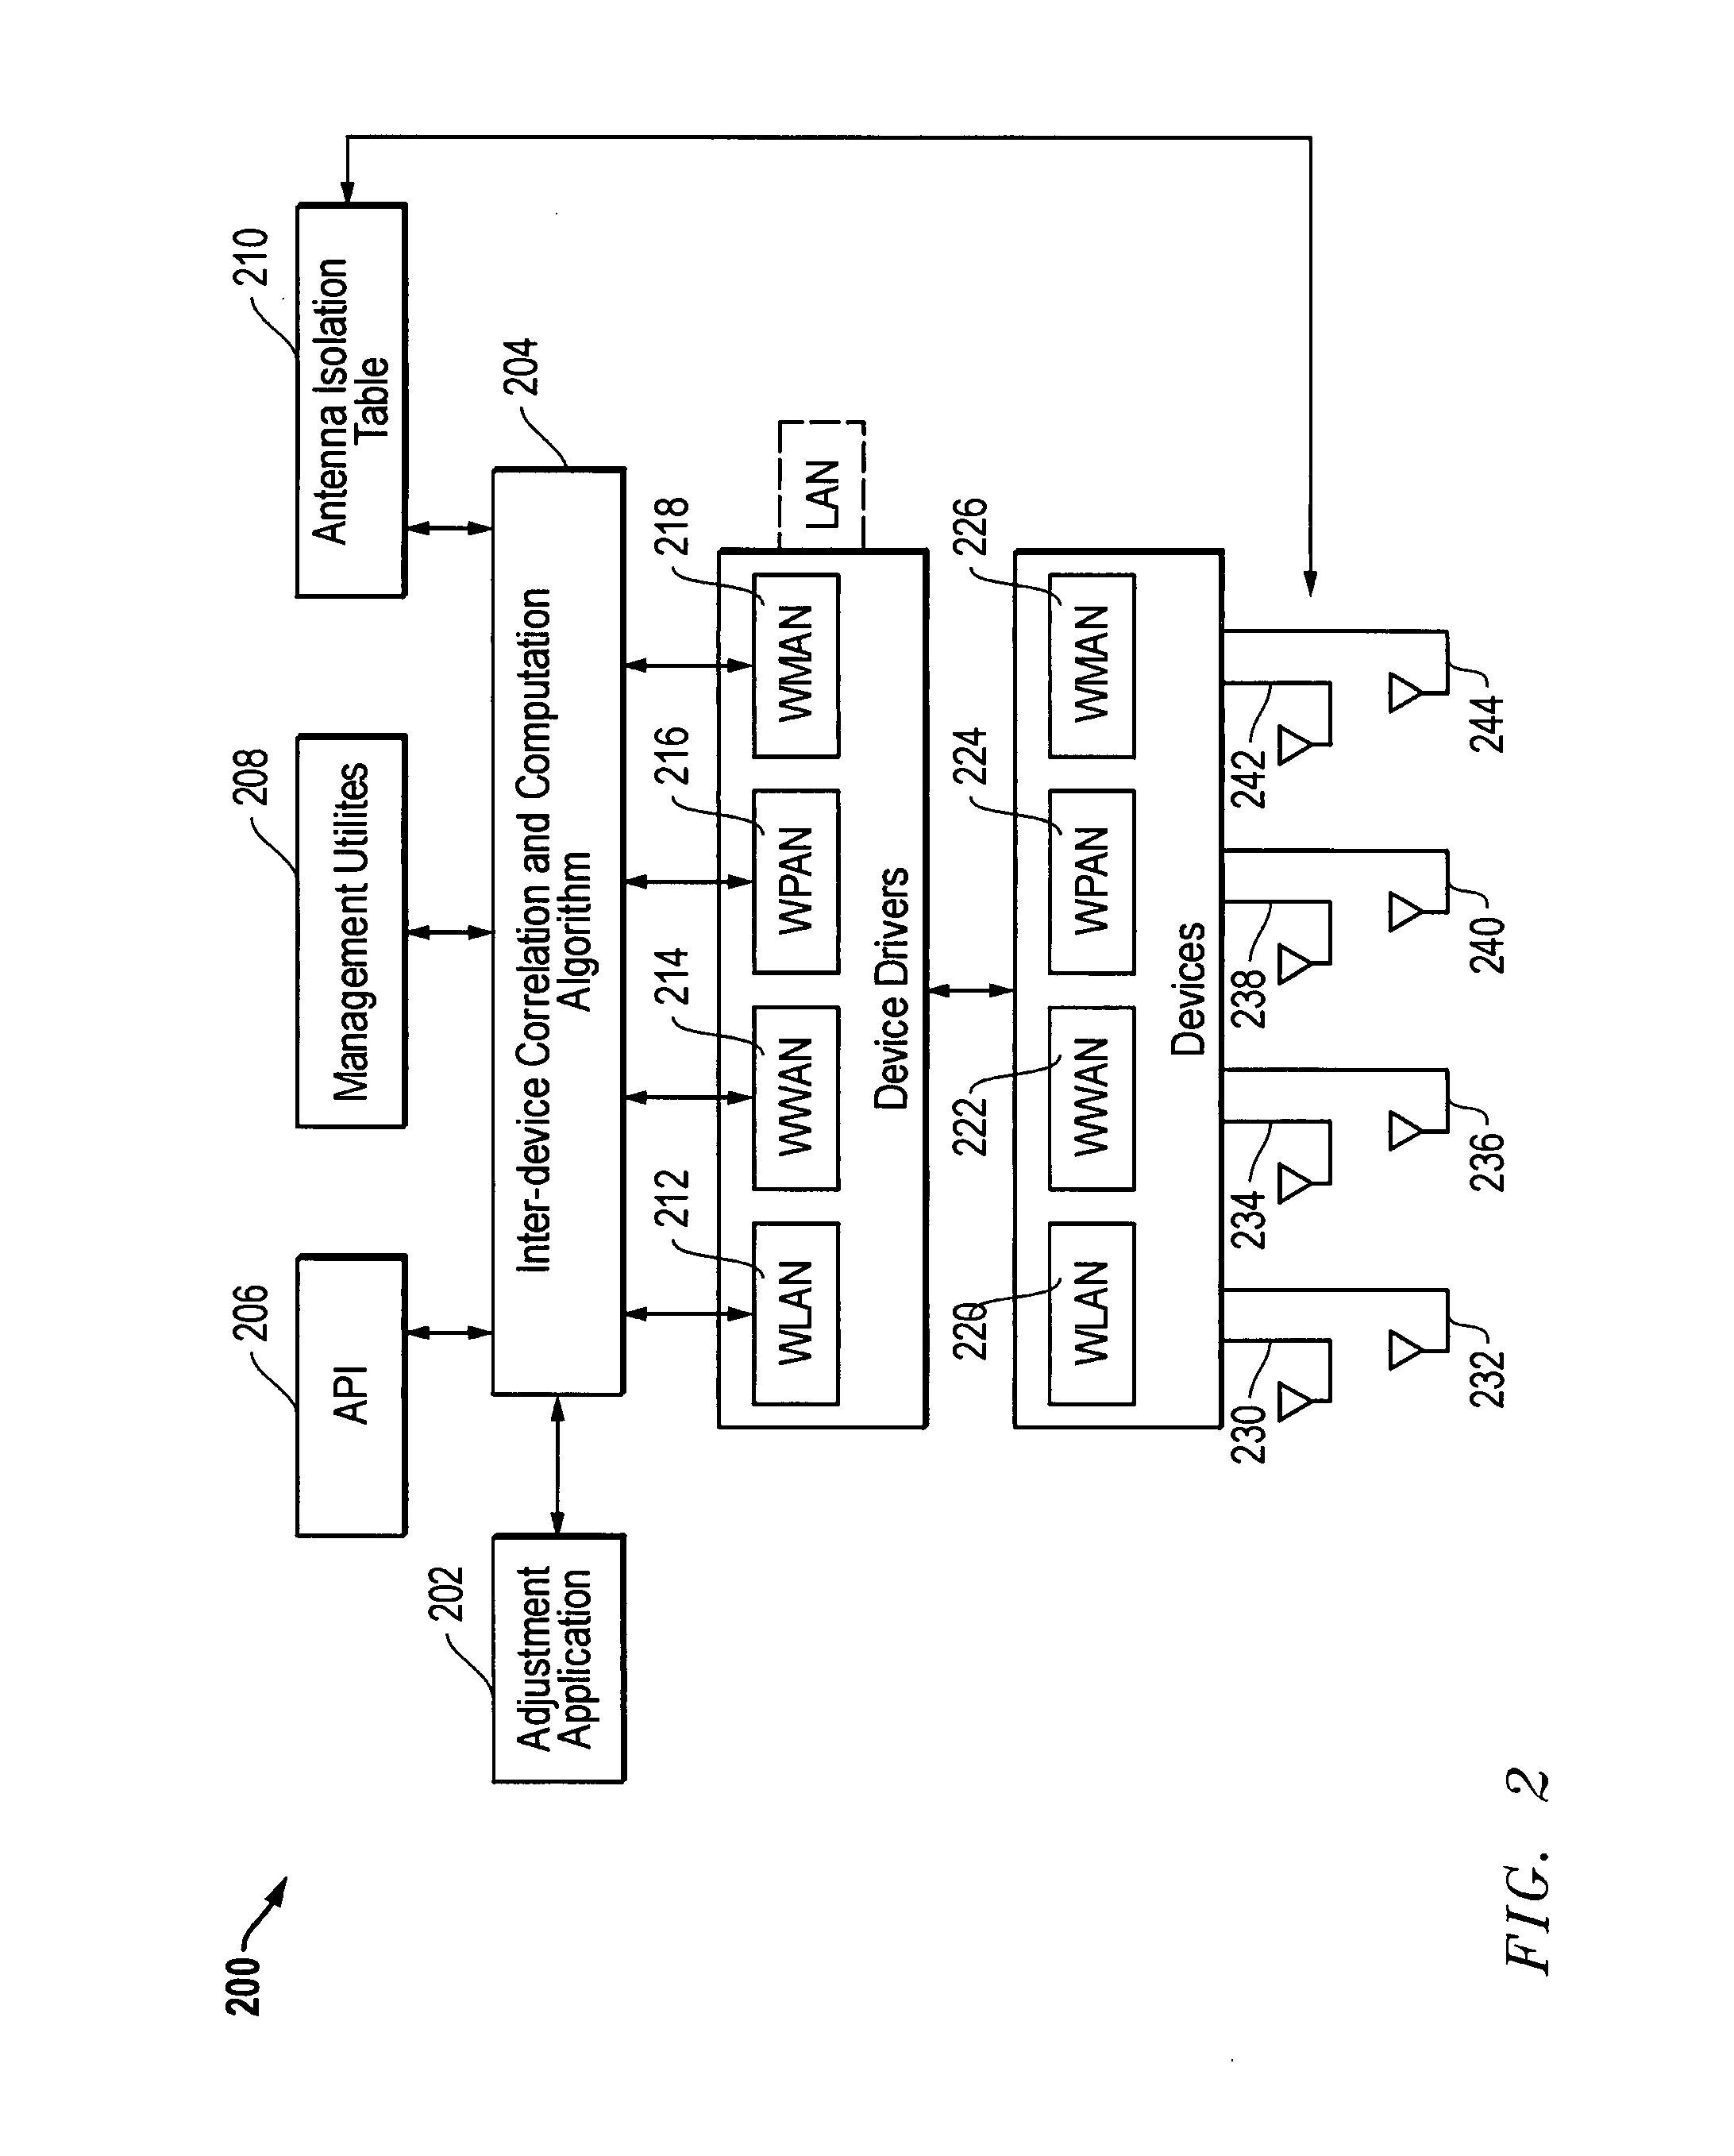 Method for selecting a priority for wireless technologies via graphical representation